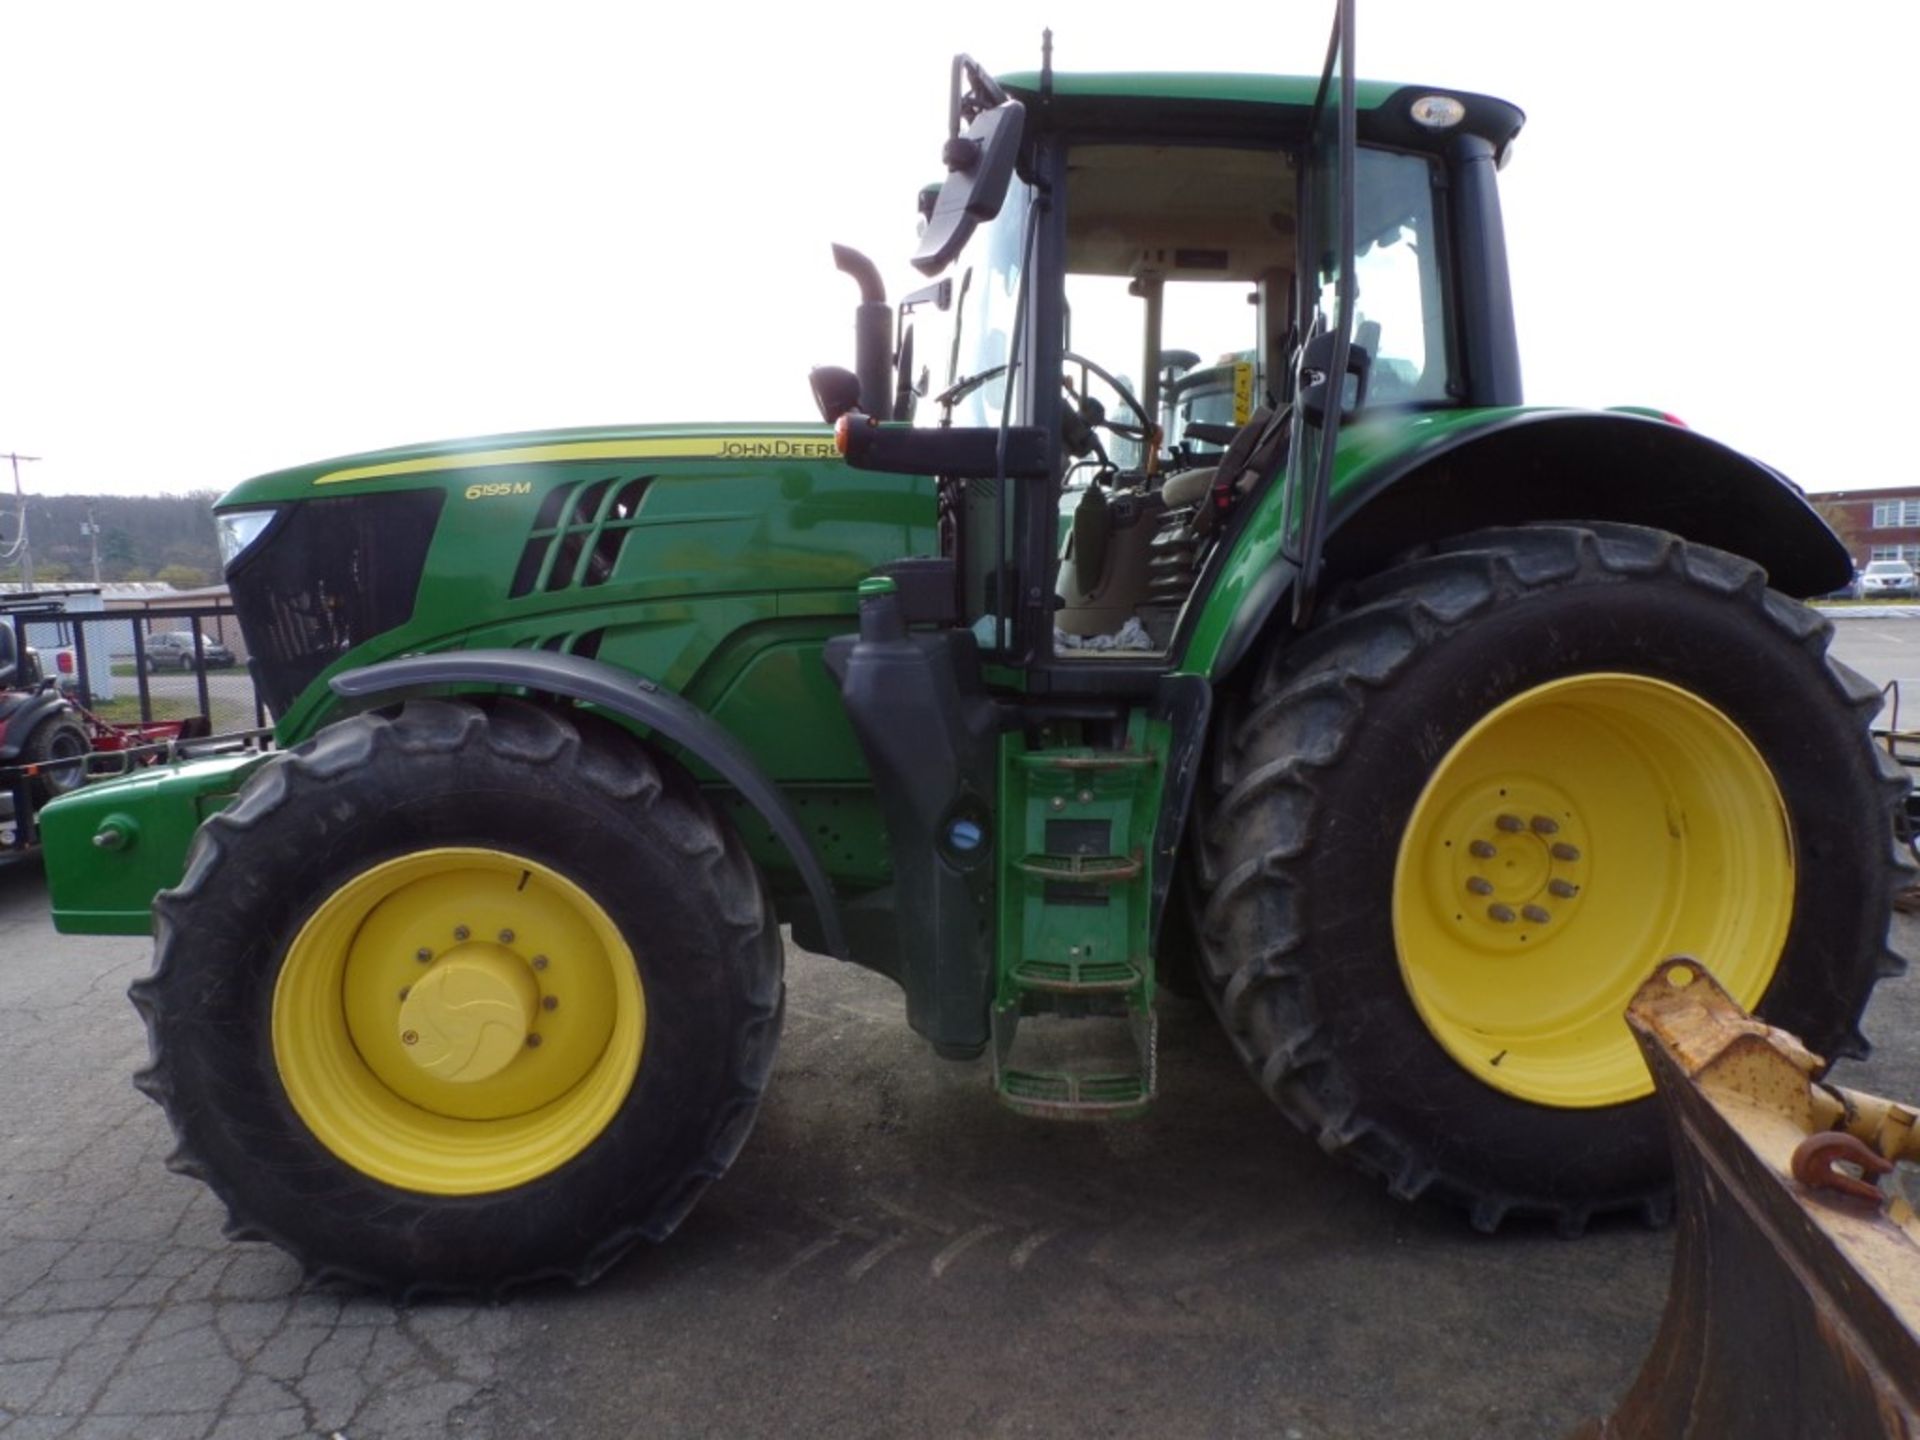 2021 John Deere 6195M, 4 WD Tractor, Power Shift Tans w/Screen, Rear Hyd. Remotes, Air Brake Hookup, - Image 4 of 8